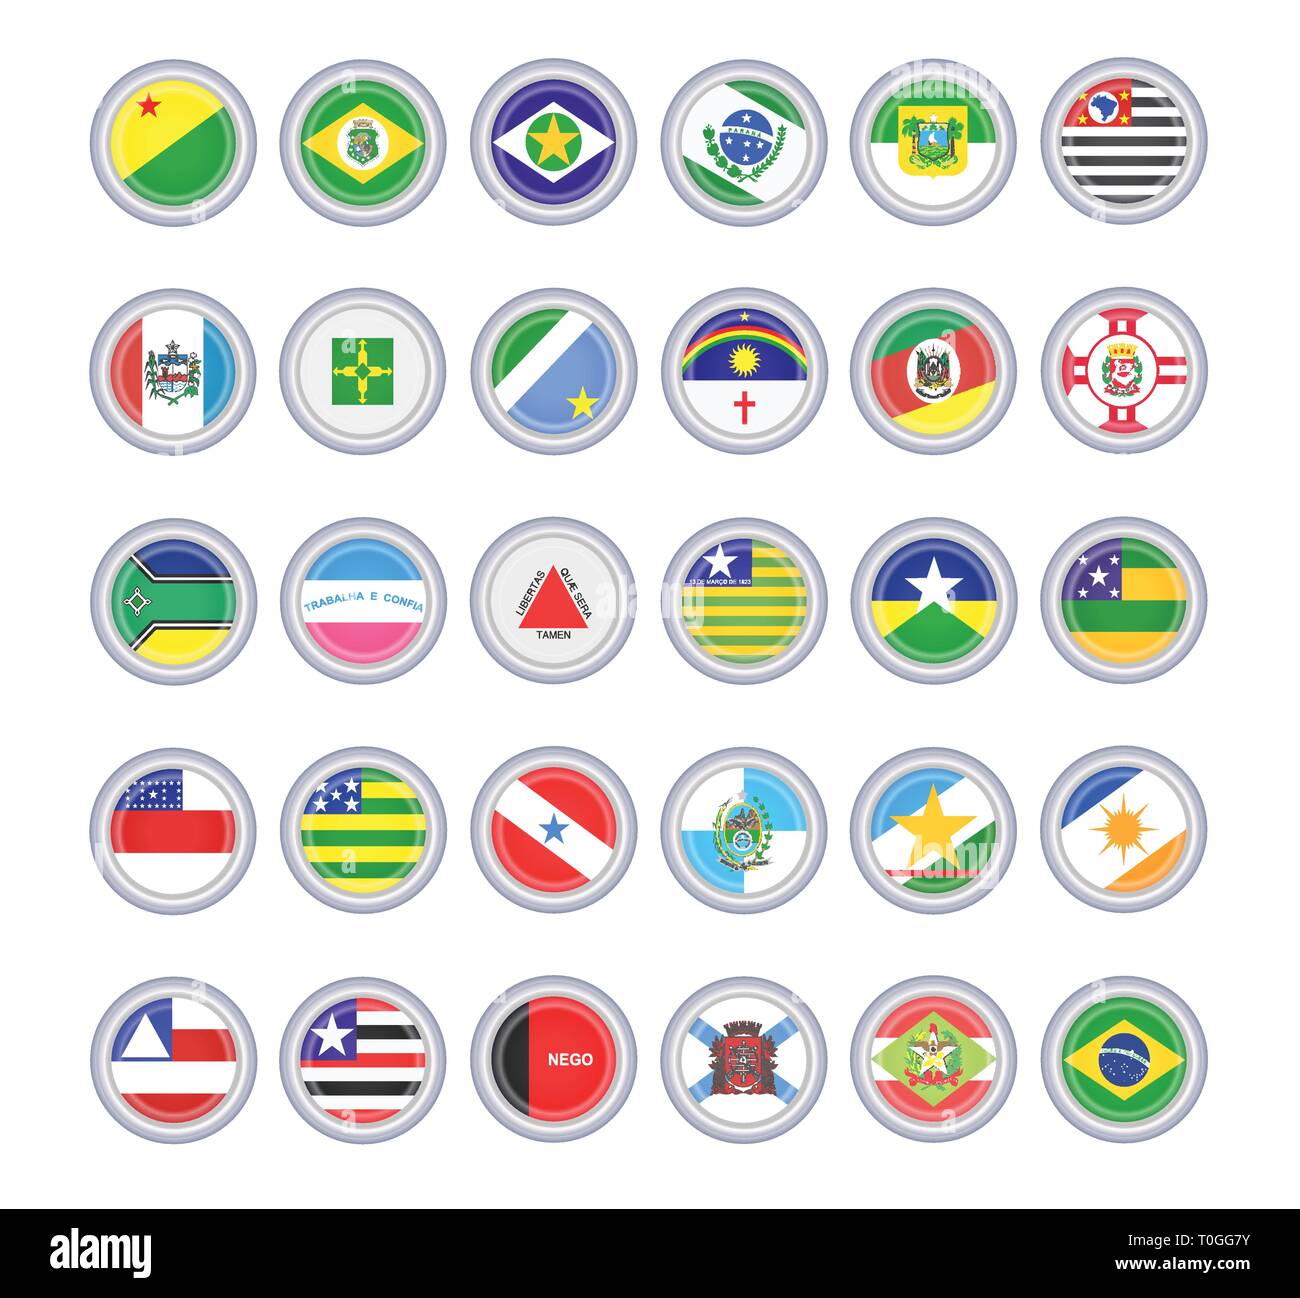 Set of vector icons. Flags of the Brazilian states. 3D illustration. Stock Vector